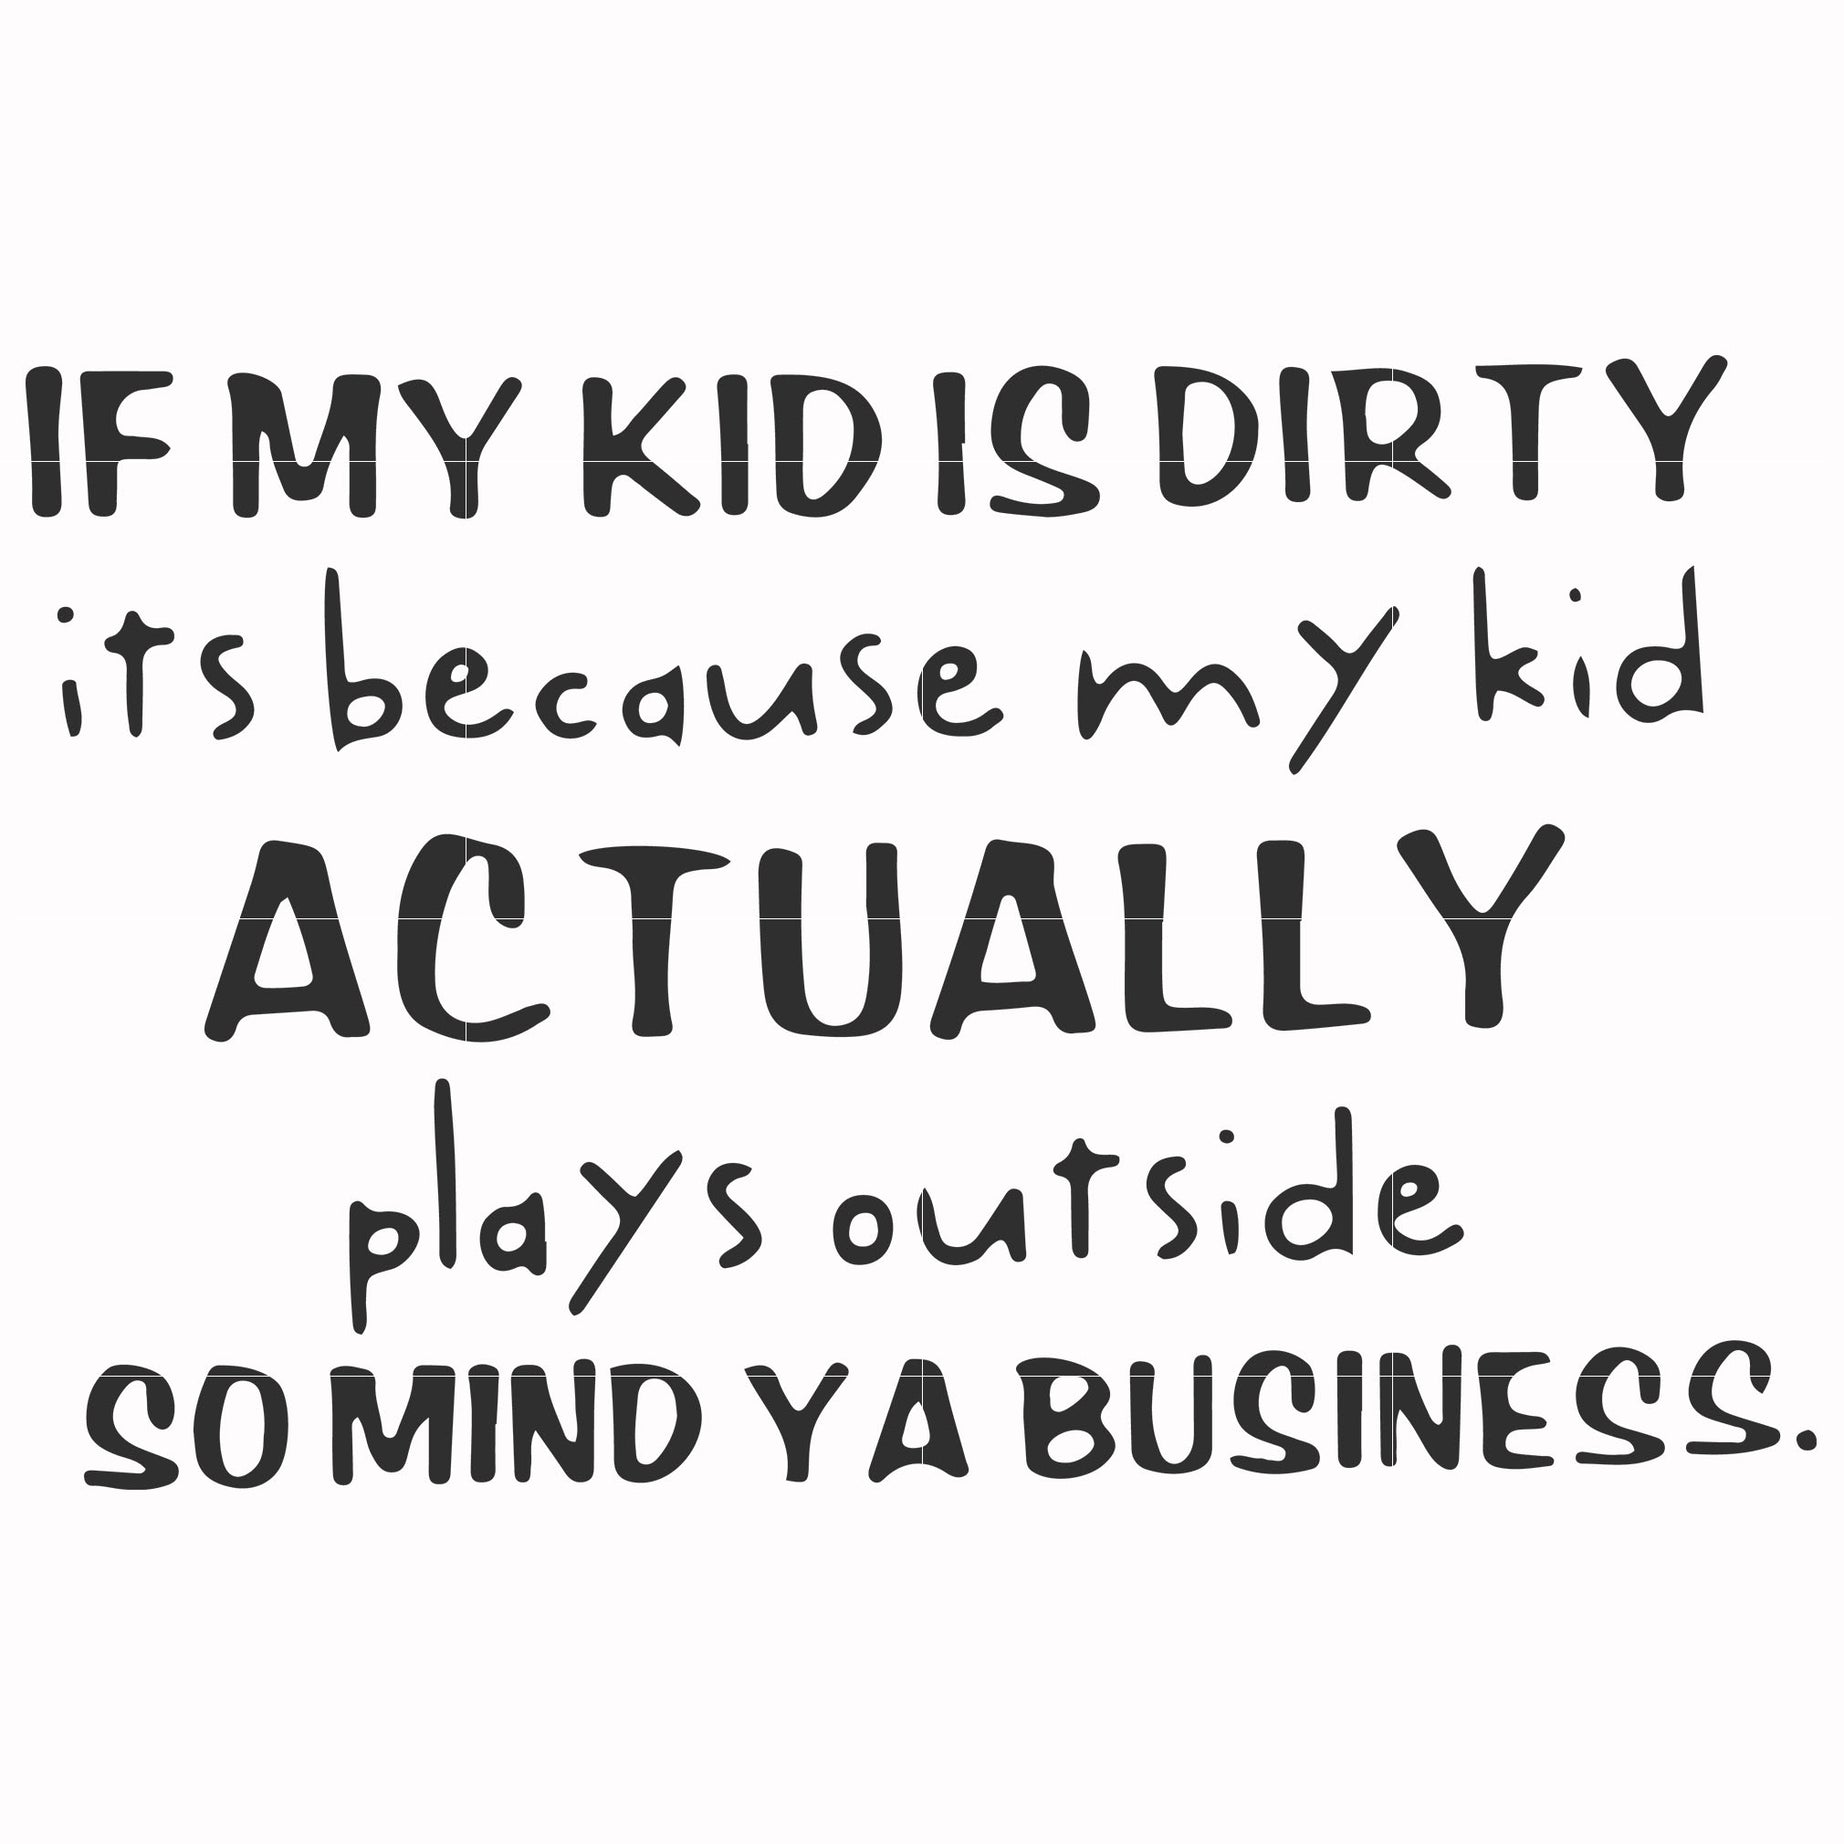 If my kid is dirty its because my kid actually plays outside so mind ya business svg, png, dxf, eps file FN000902